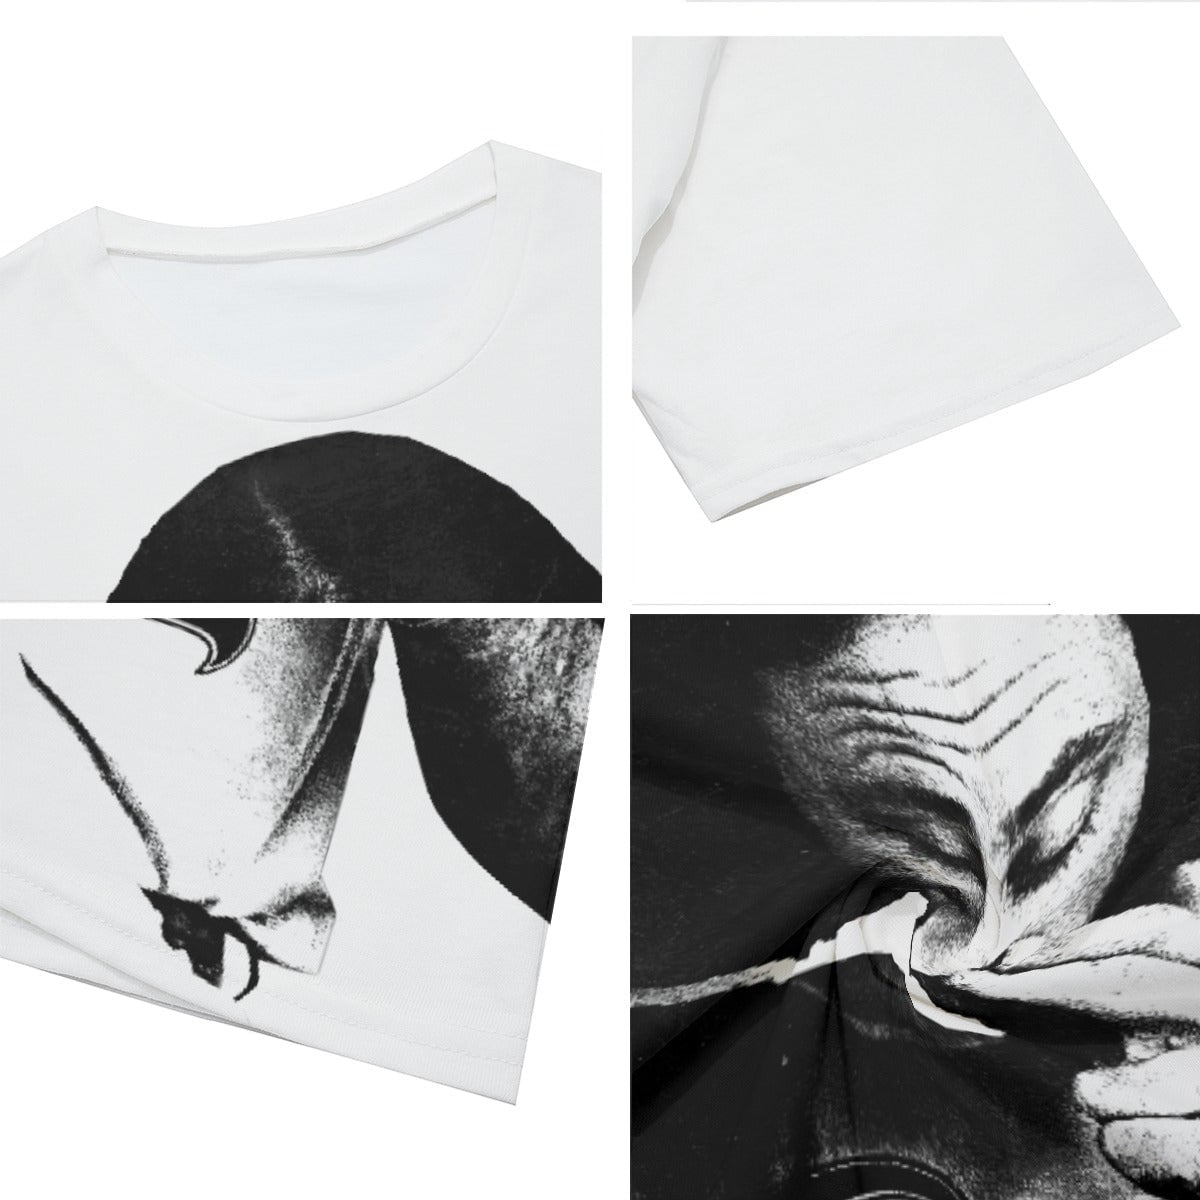 Cocaine Cowboy T-Shirt - Make a Statement with This Edgy Tee